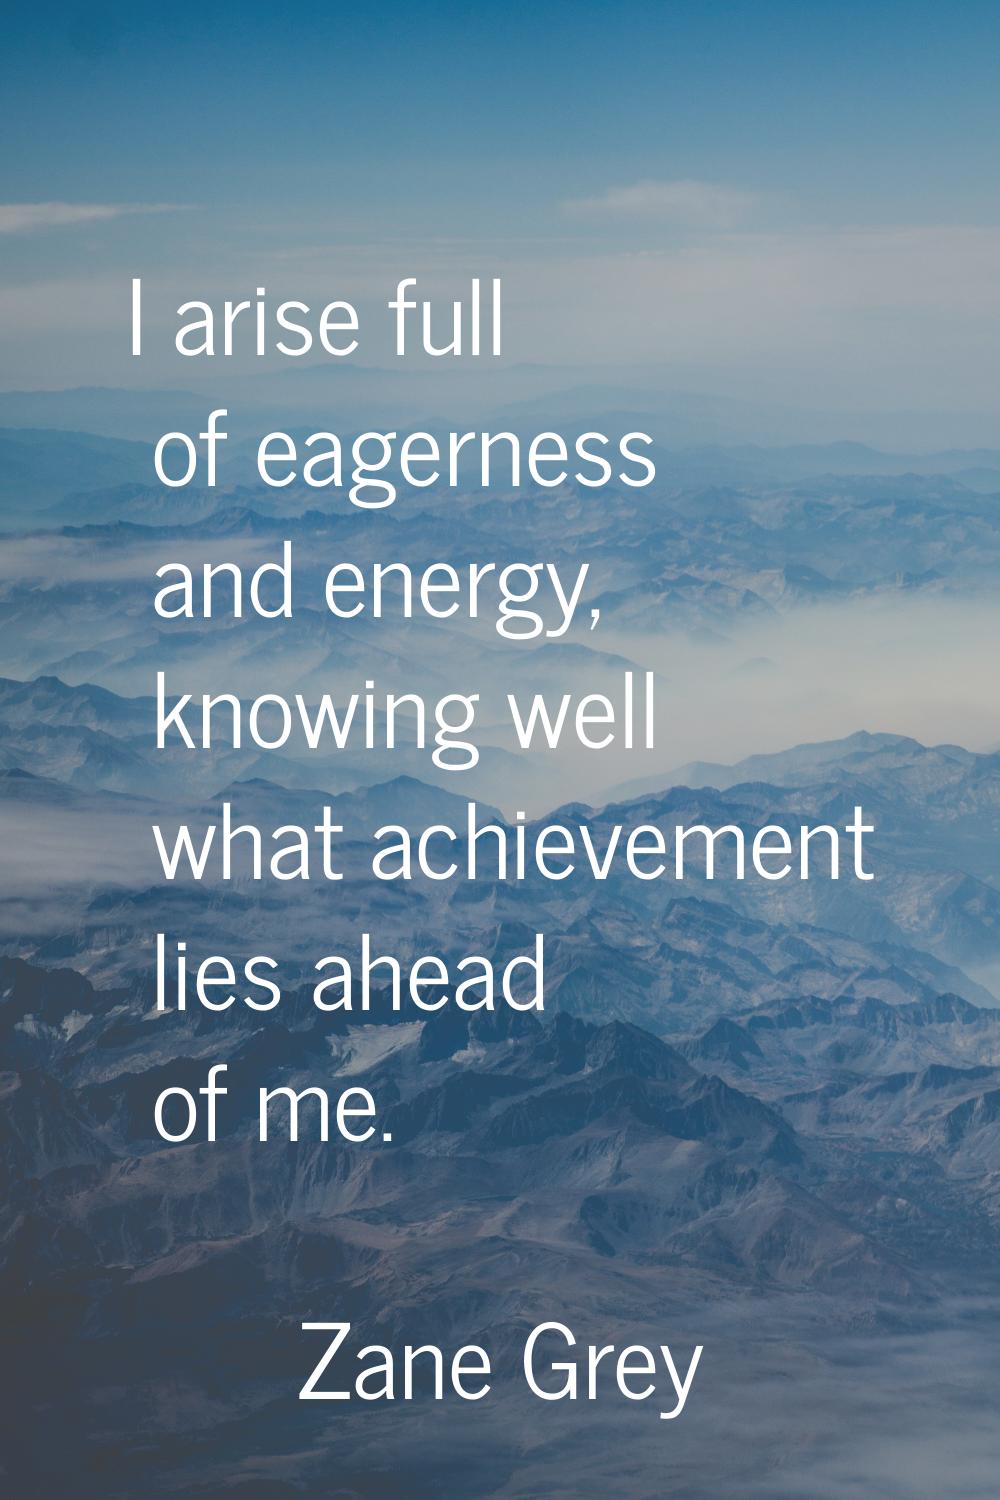 I arise full of eagerness and energy, knowing well what achievement lies ahead of me.